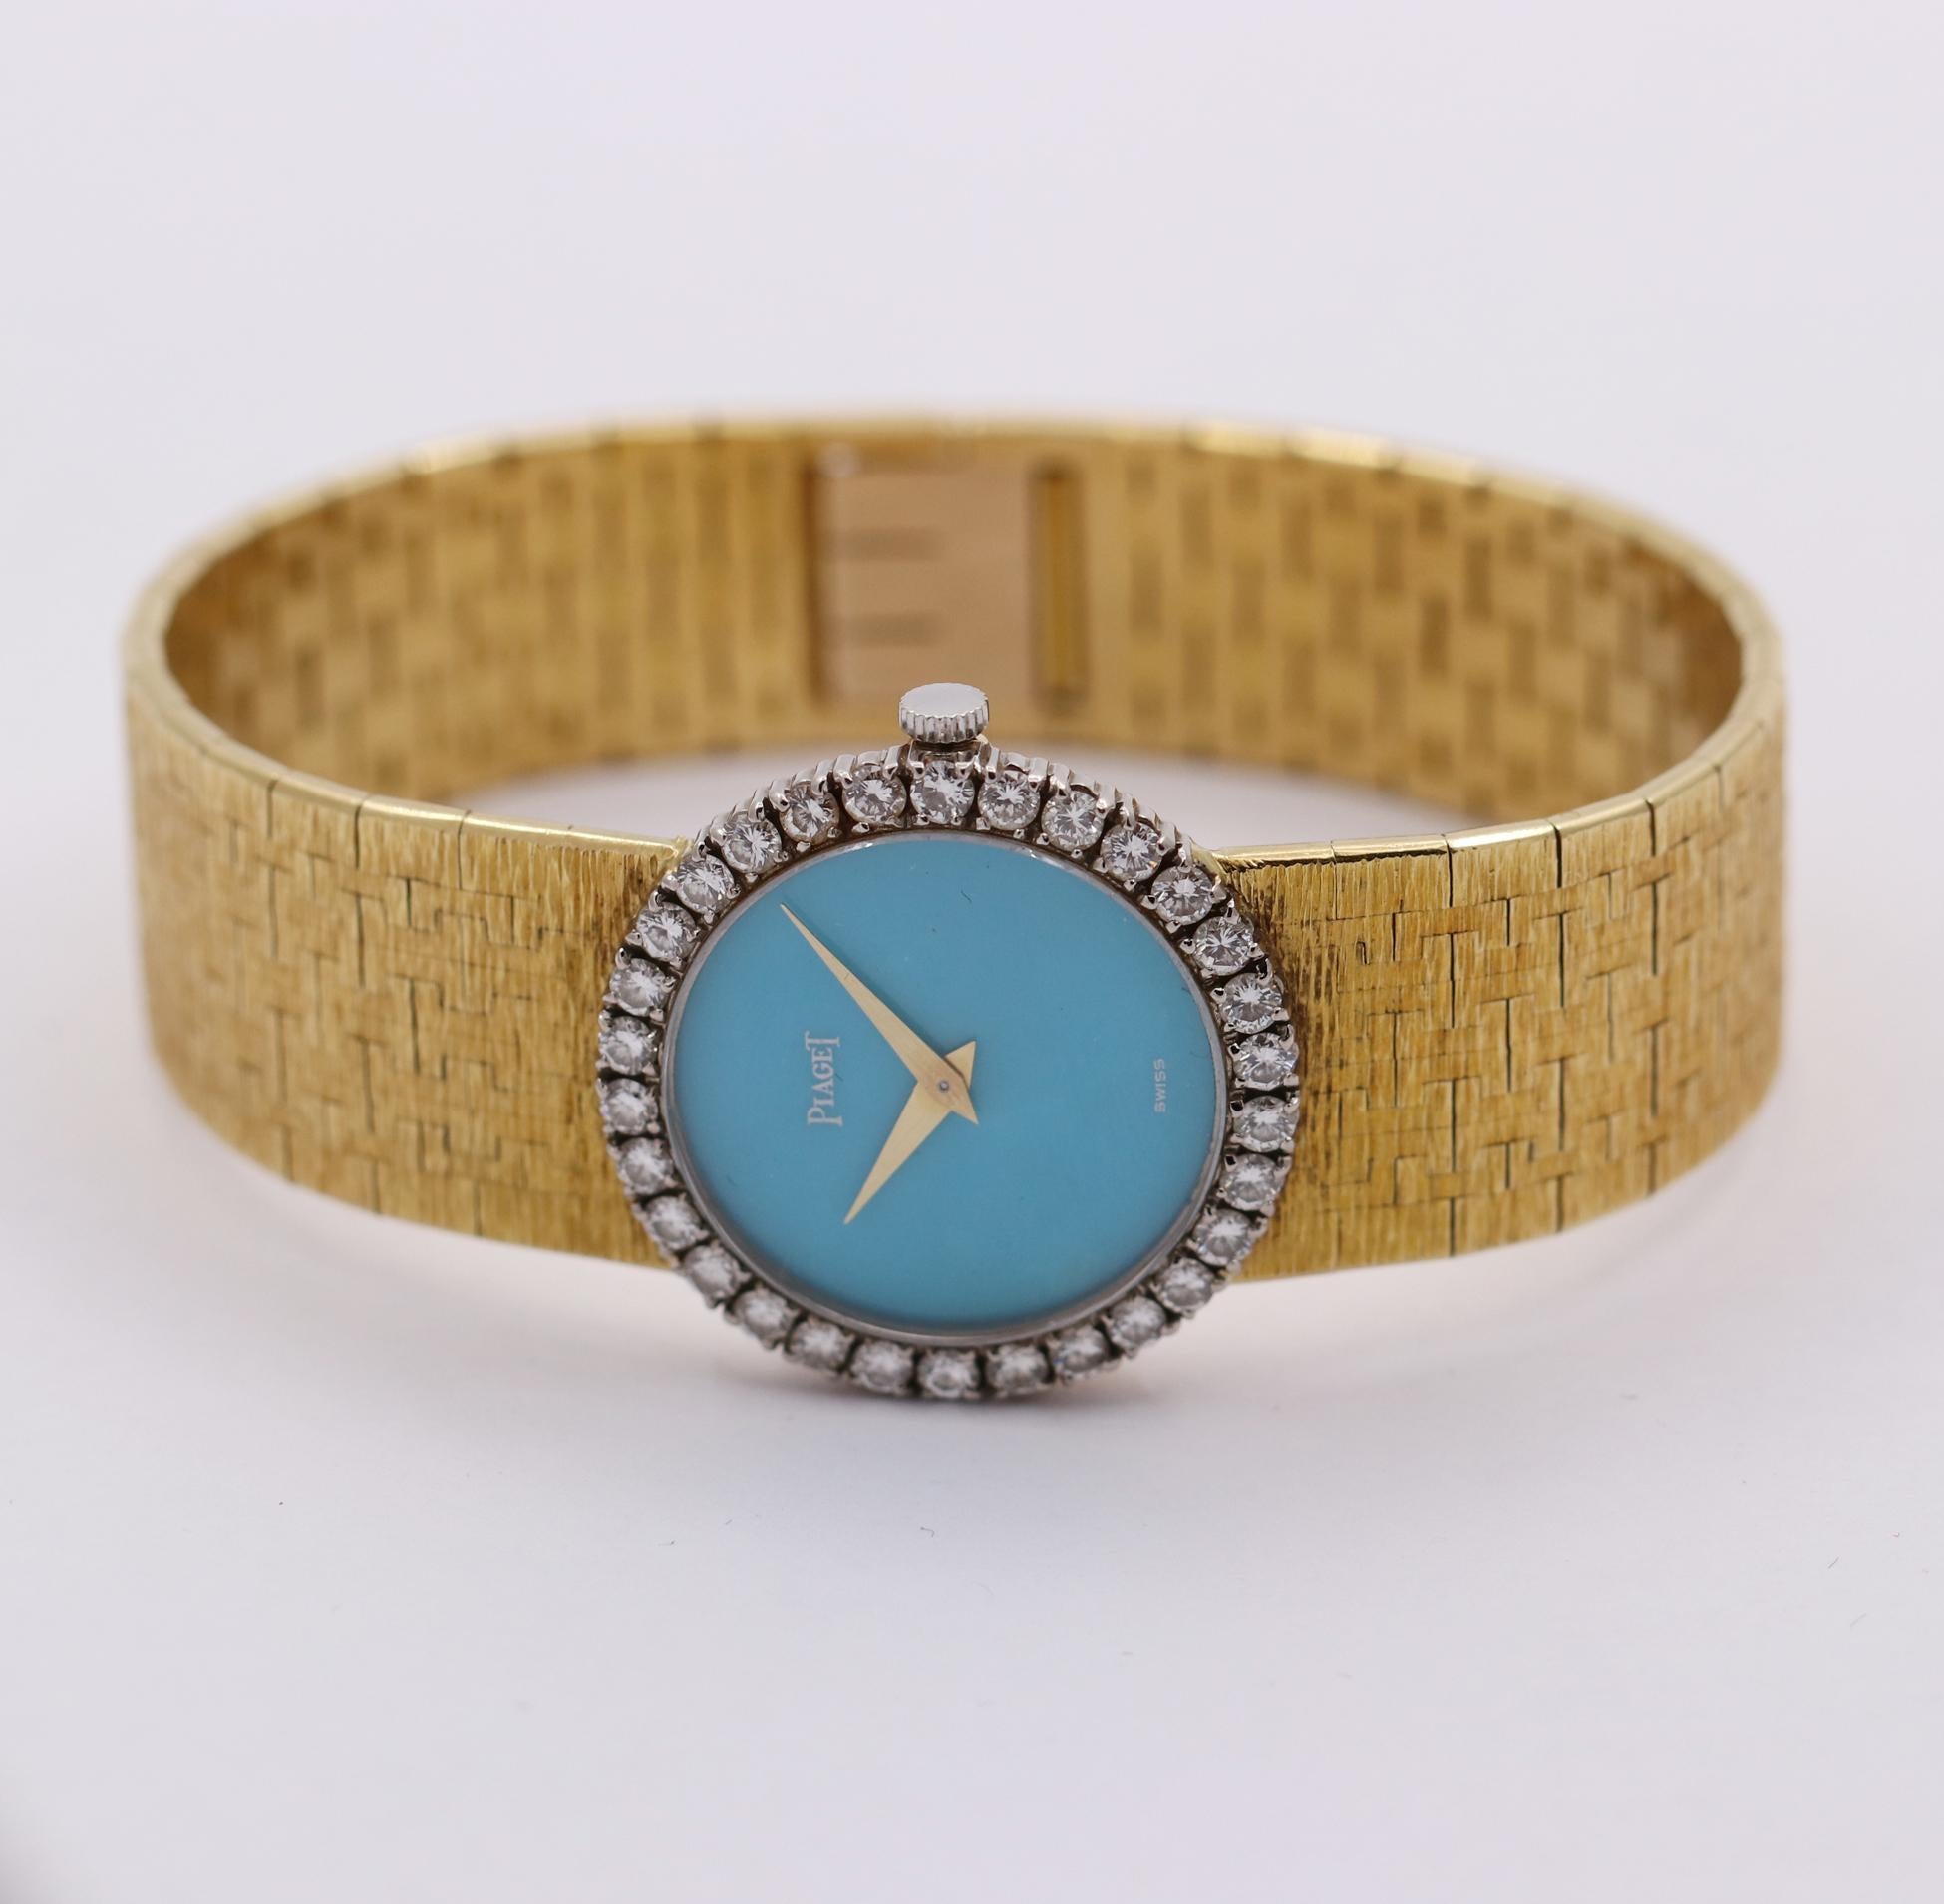 Gold Piaget Wristwatch with Turquoise Dial and Diamond Bezel 1